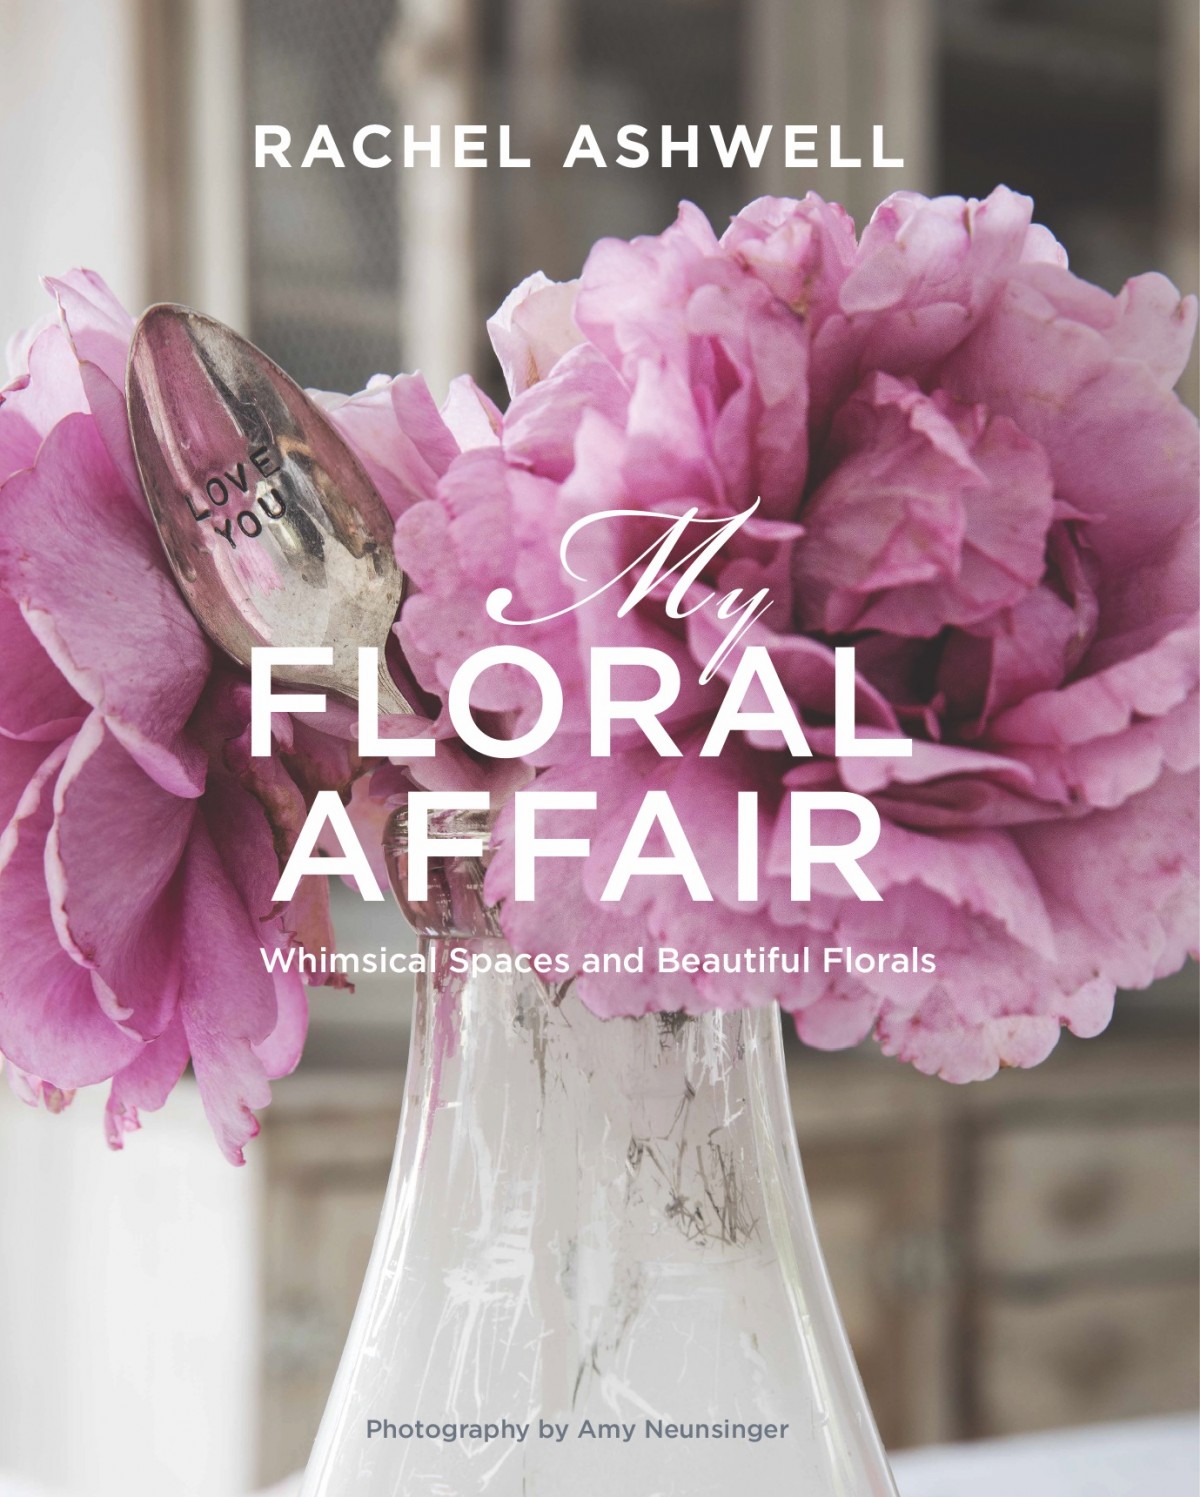 book cover for My Floral Affair by Rachel Ashwell